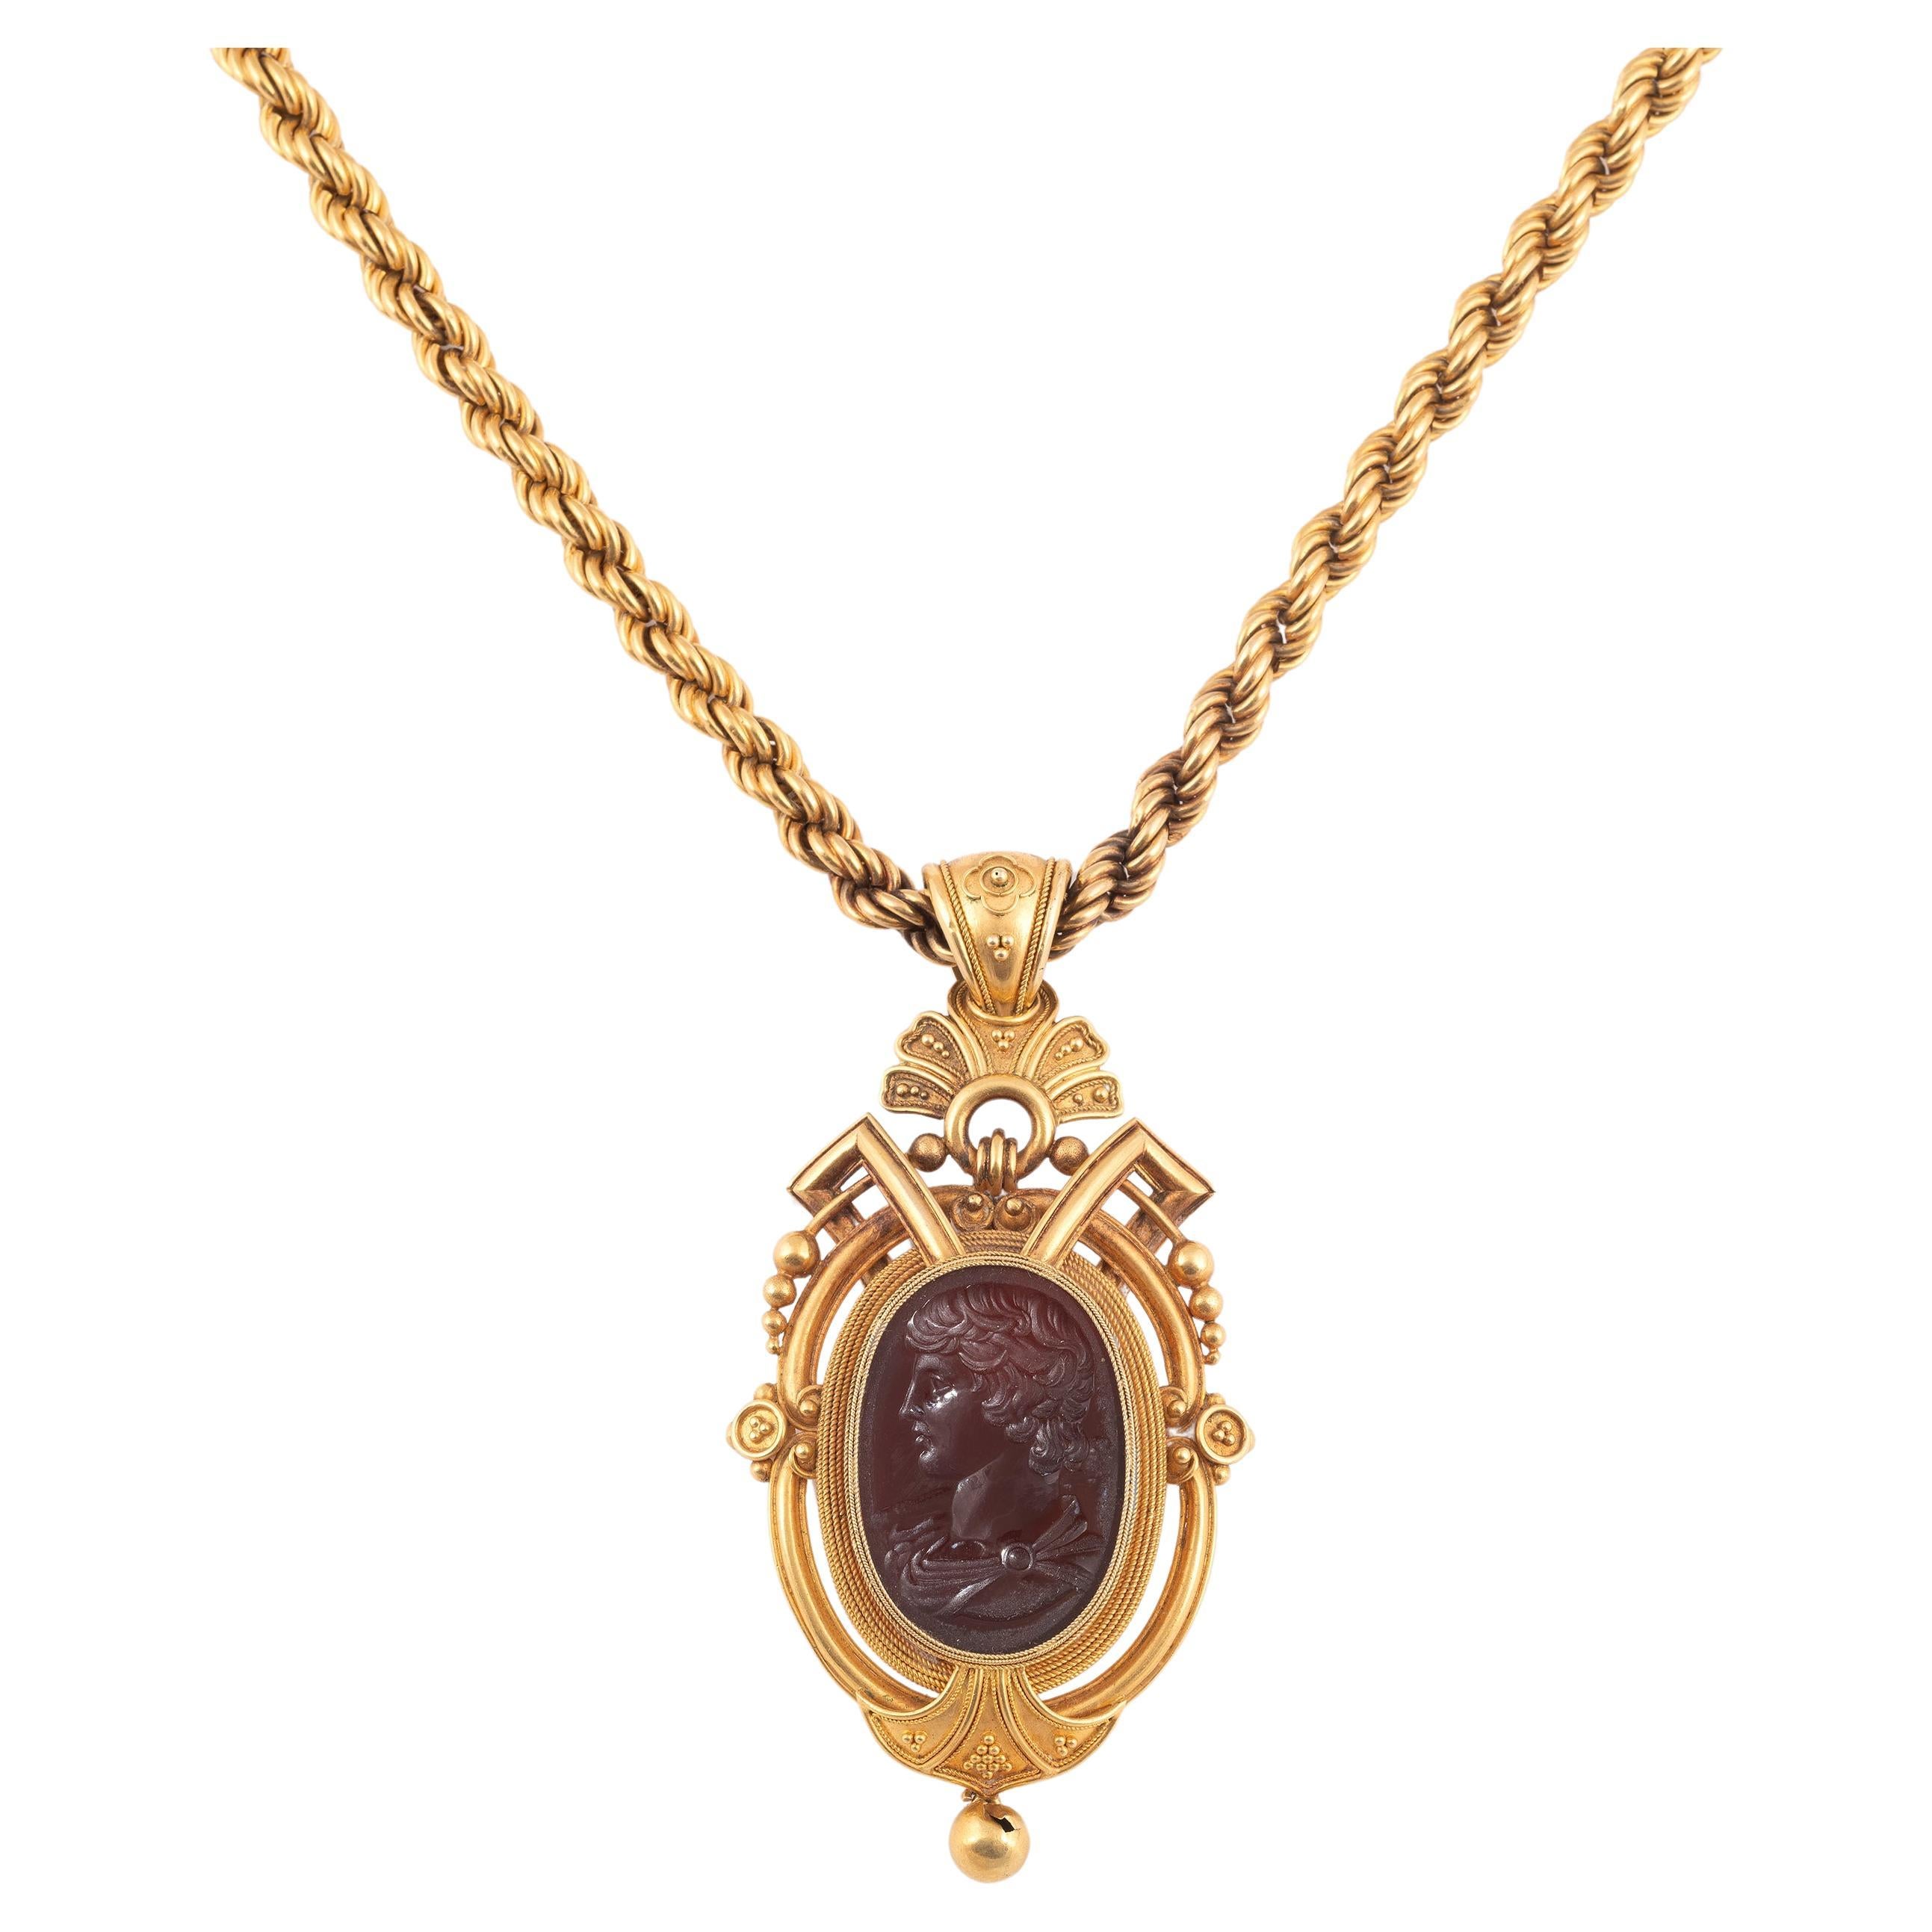 An Archaeological Revival Gold And Agate Intaglio Necklace Circa 1850